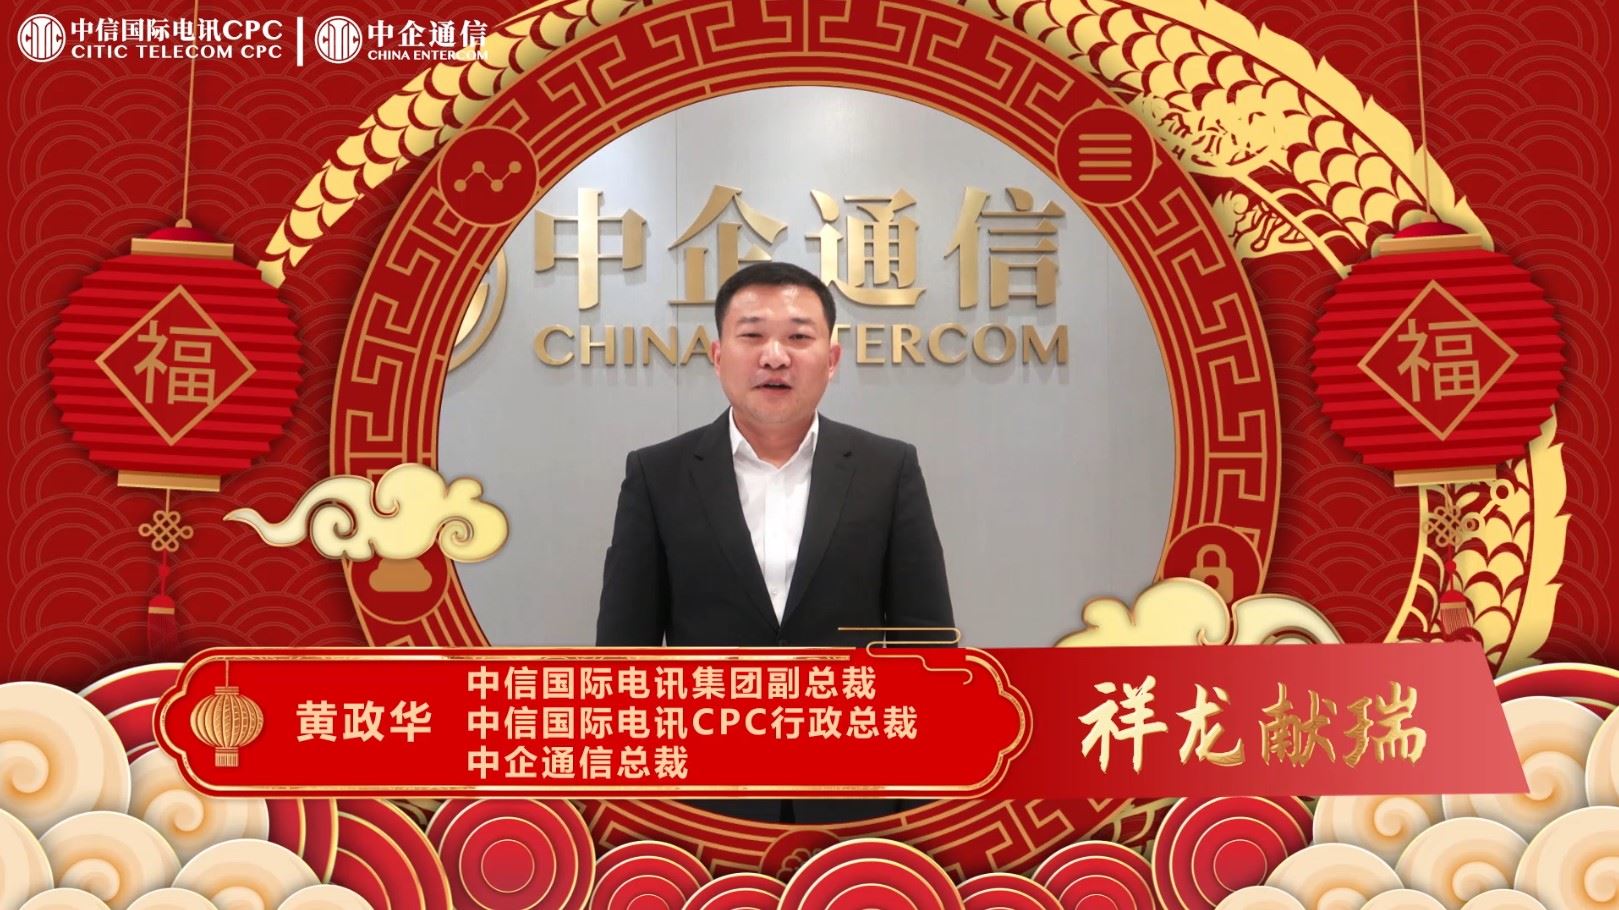 CITIC Telecom CPC wishes you all a wonderful Year of the Dragon filled with abundance, joy, and good fortune!